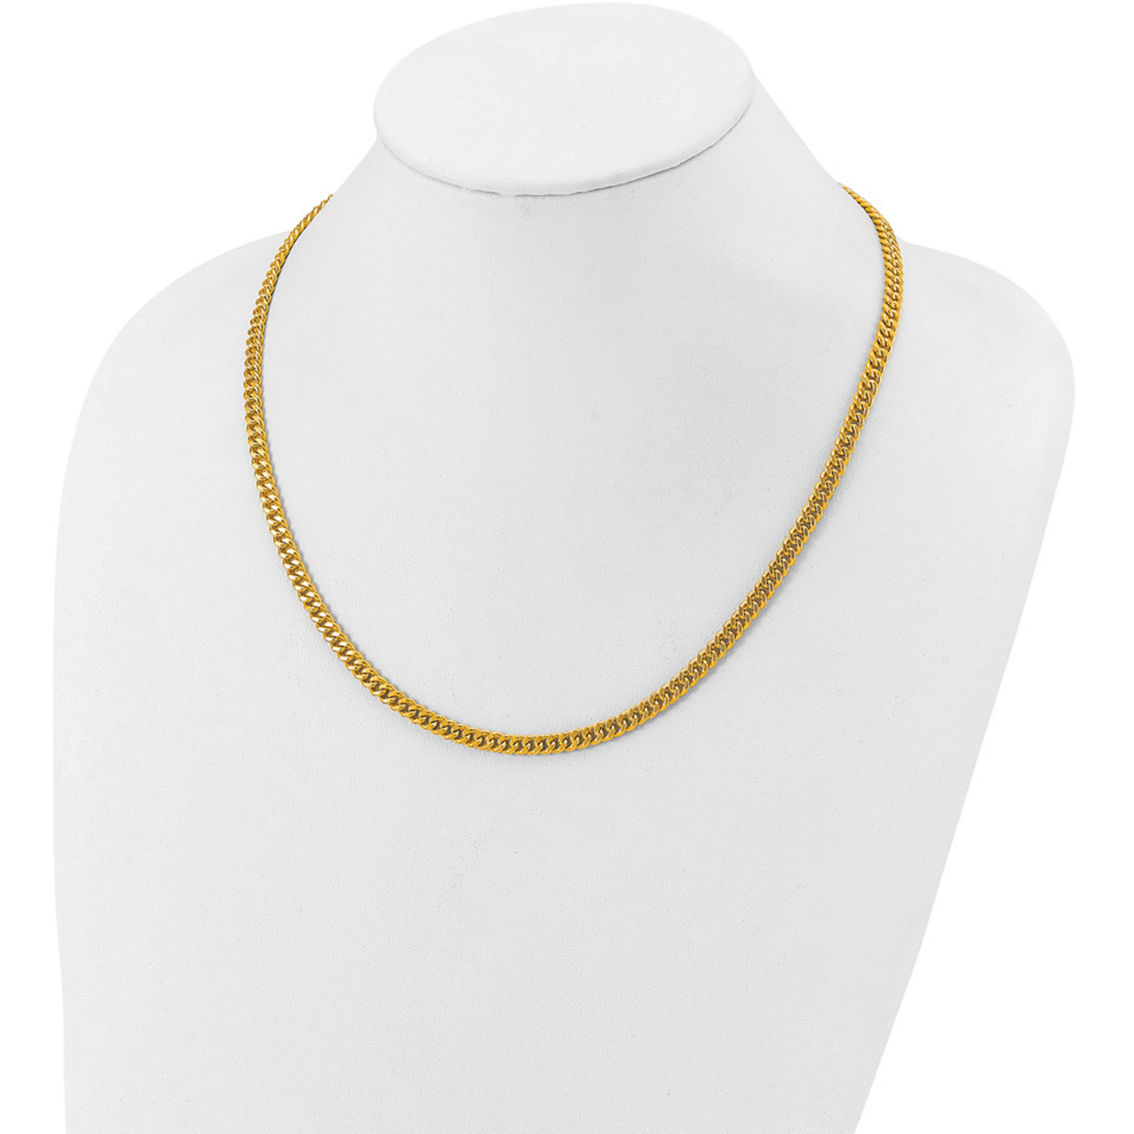 24K Pure Gold 24K Yellow Gold 5mm Solid Curb 20 in. Chain - Image 4 of 5